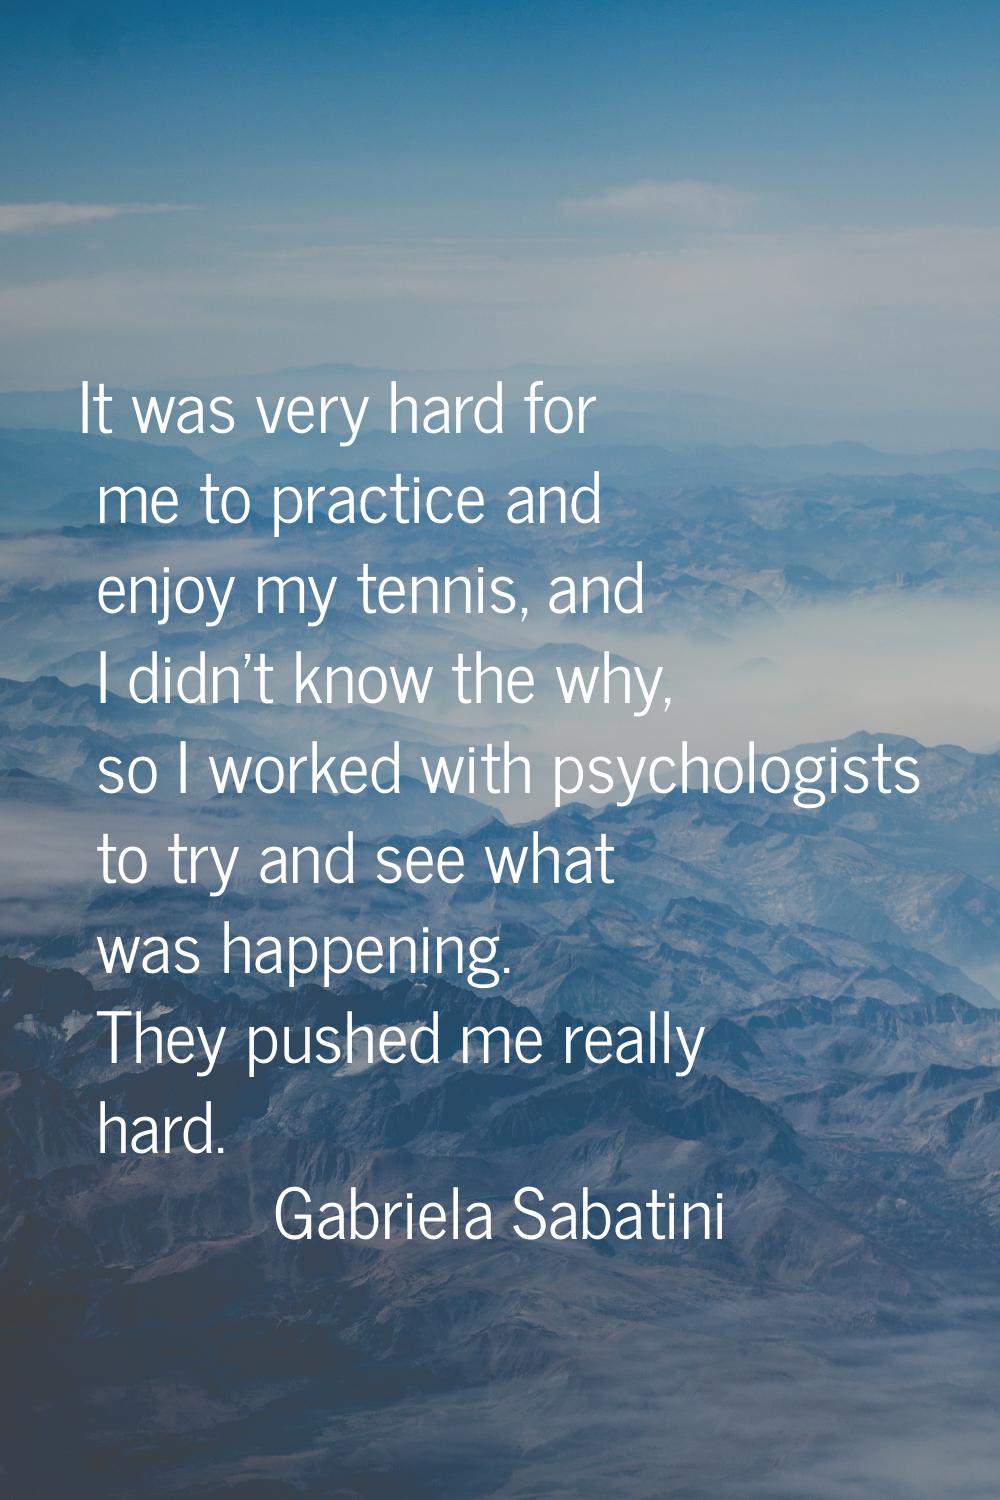 It was very hard for me to practice and enjoy my tennis, and I didn't know the why, so I worked wit